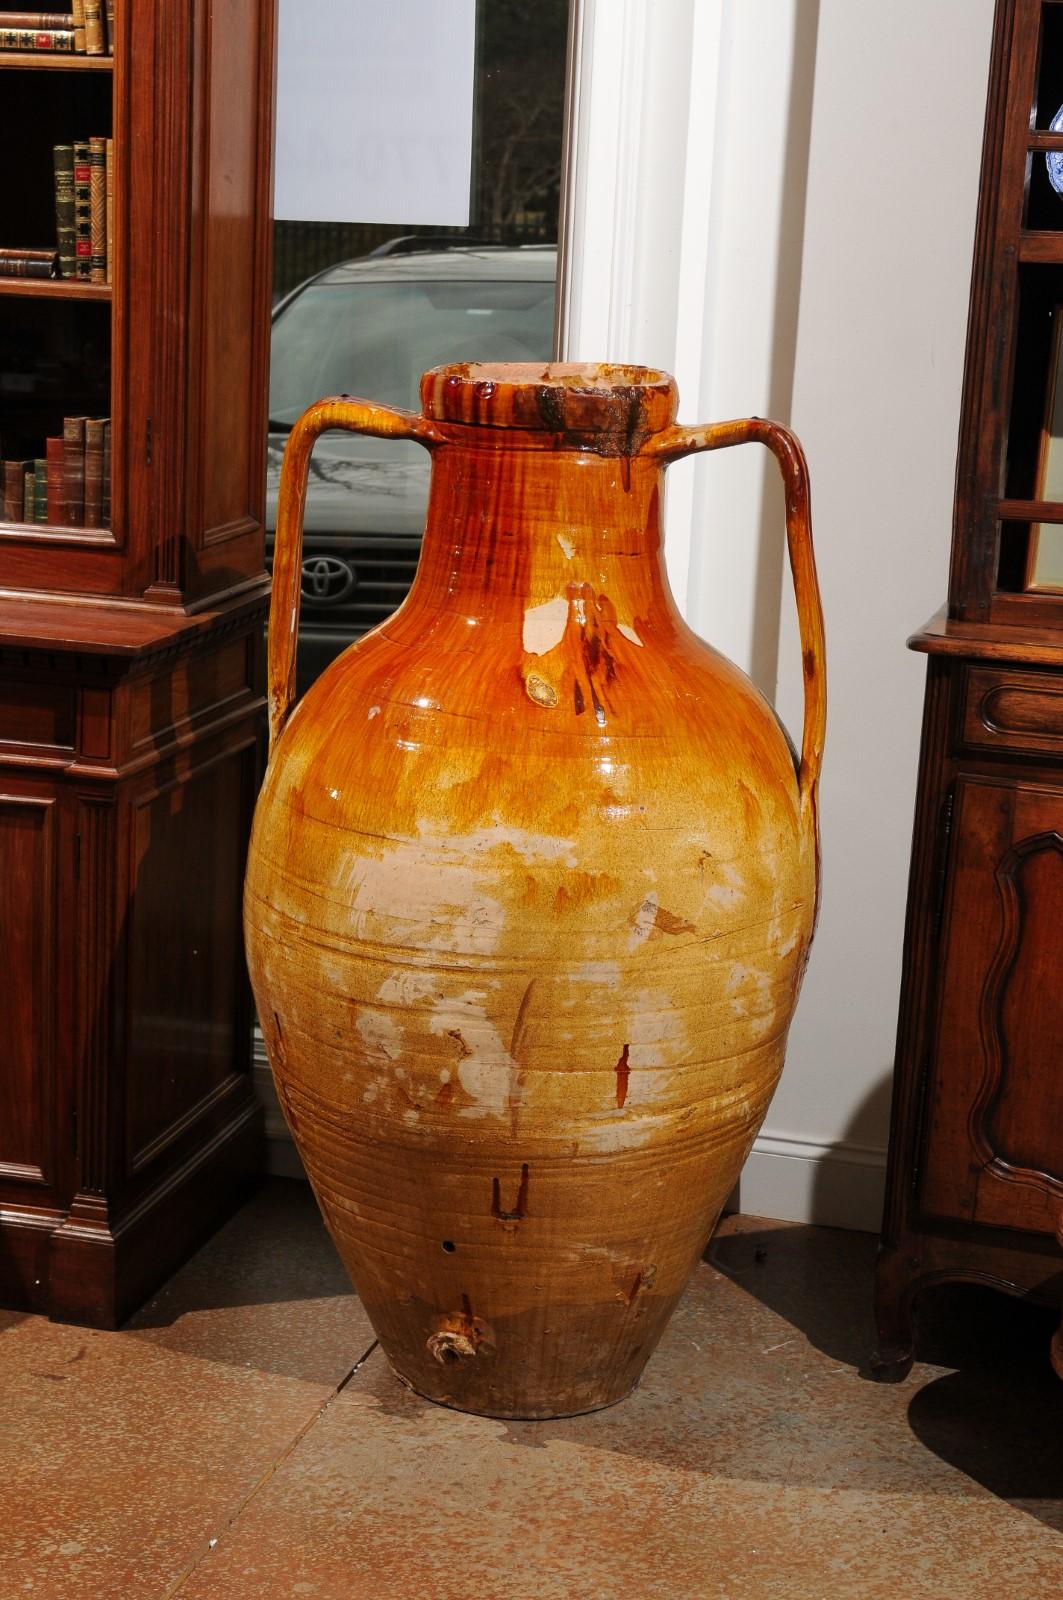 An Italian yellow glazed olive oil jar from the 18th century, with two handles and nicely distressed appearance. Handcrafted in Italy during the 18th century, this rustic olive oil jar is boasting a nicely weathered patina. The tall circular